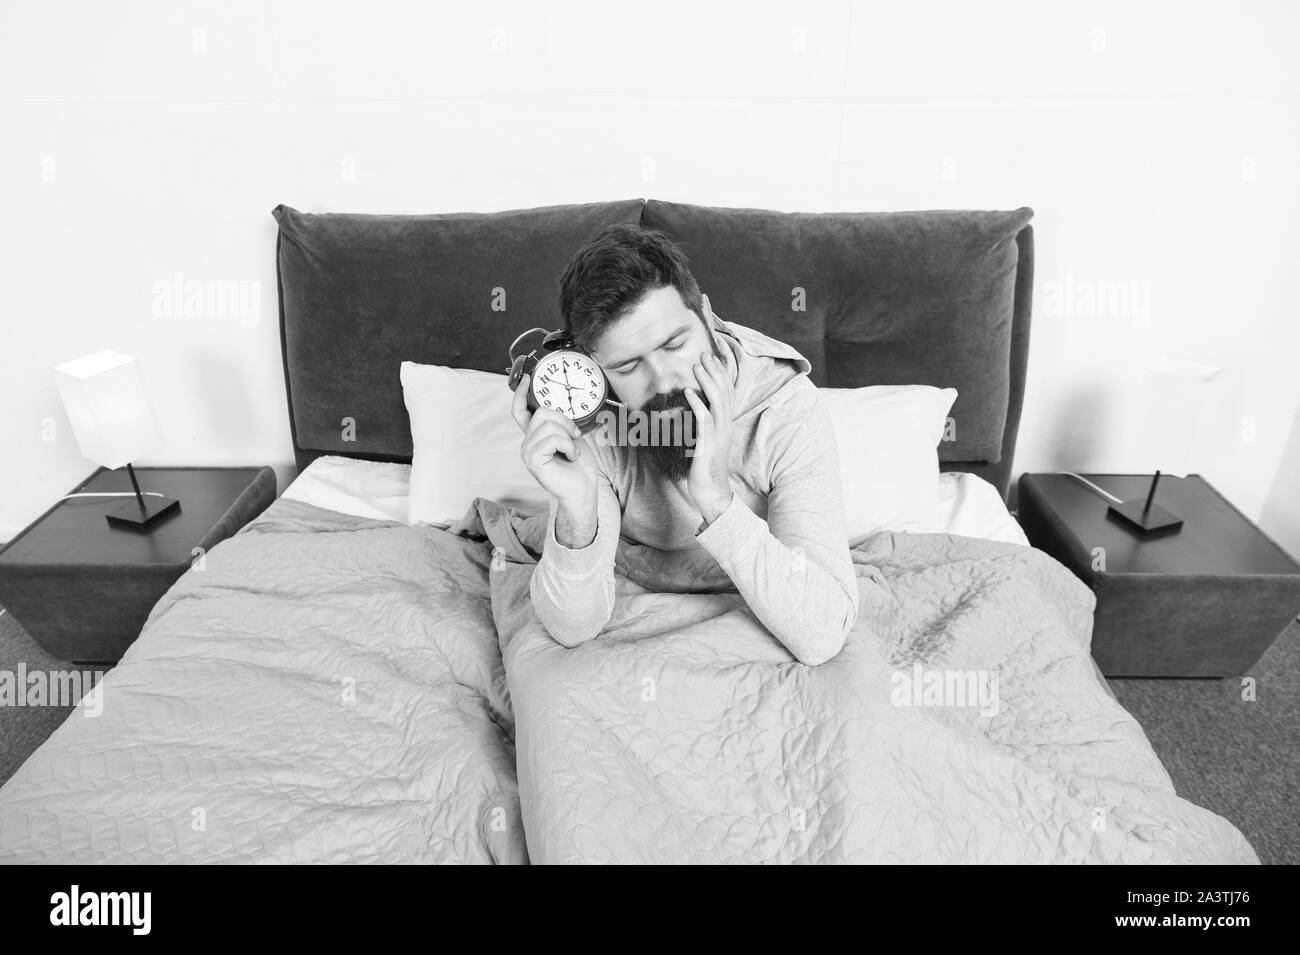 Again unhappy in morning. Tips for waking up early. Man bearded hipster sleepy face waking up. Daily schedule for healthy lifestyle. Alarm clock ringing. Problem early morning awakening. Get up early. Stock Photo